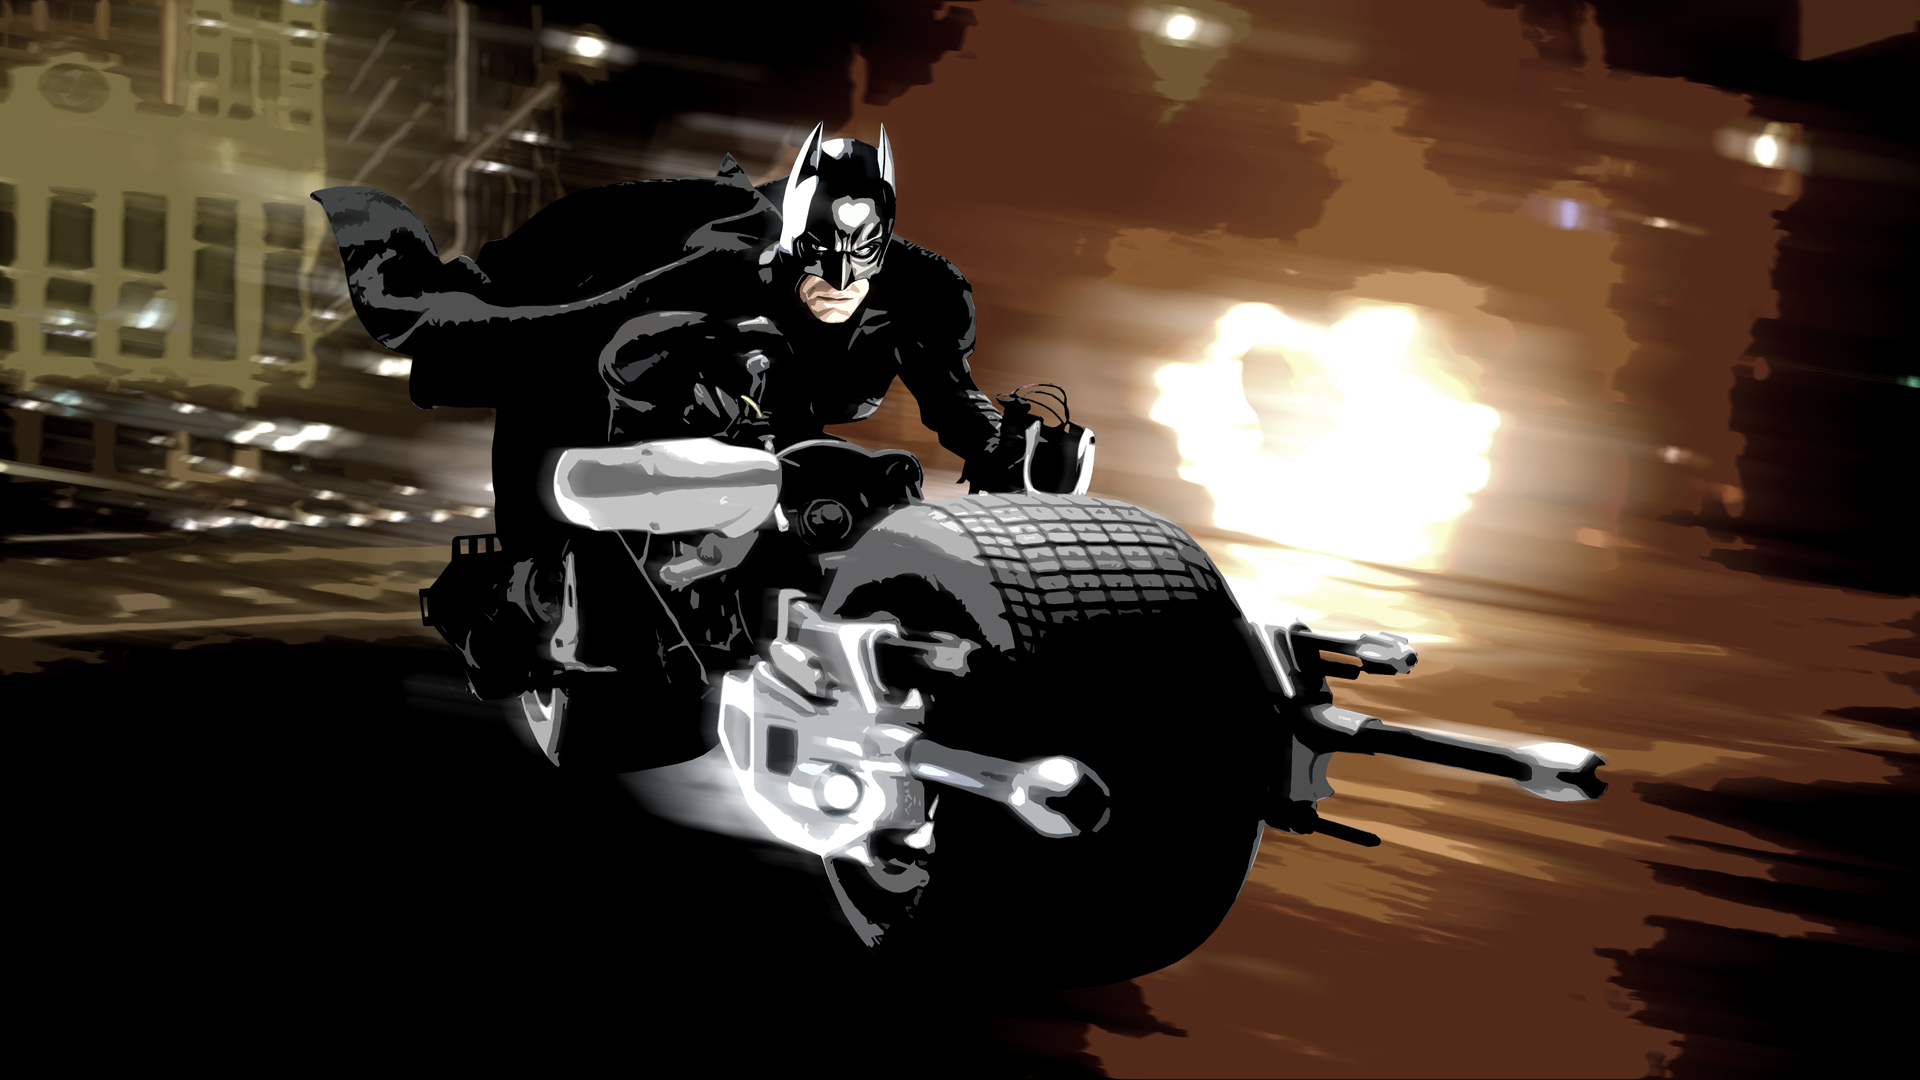 The Dark Knight download the new for apple